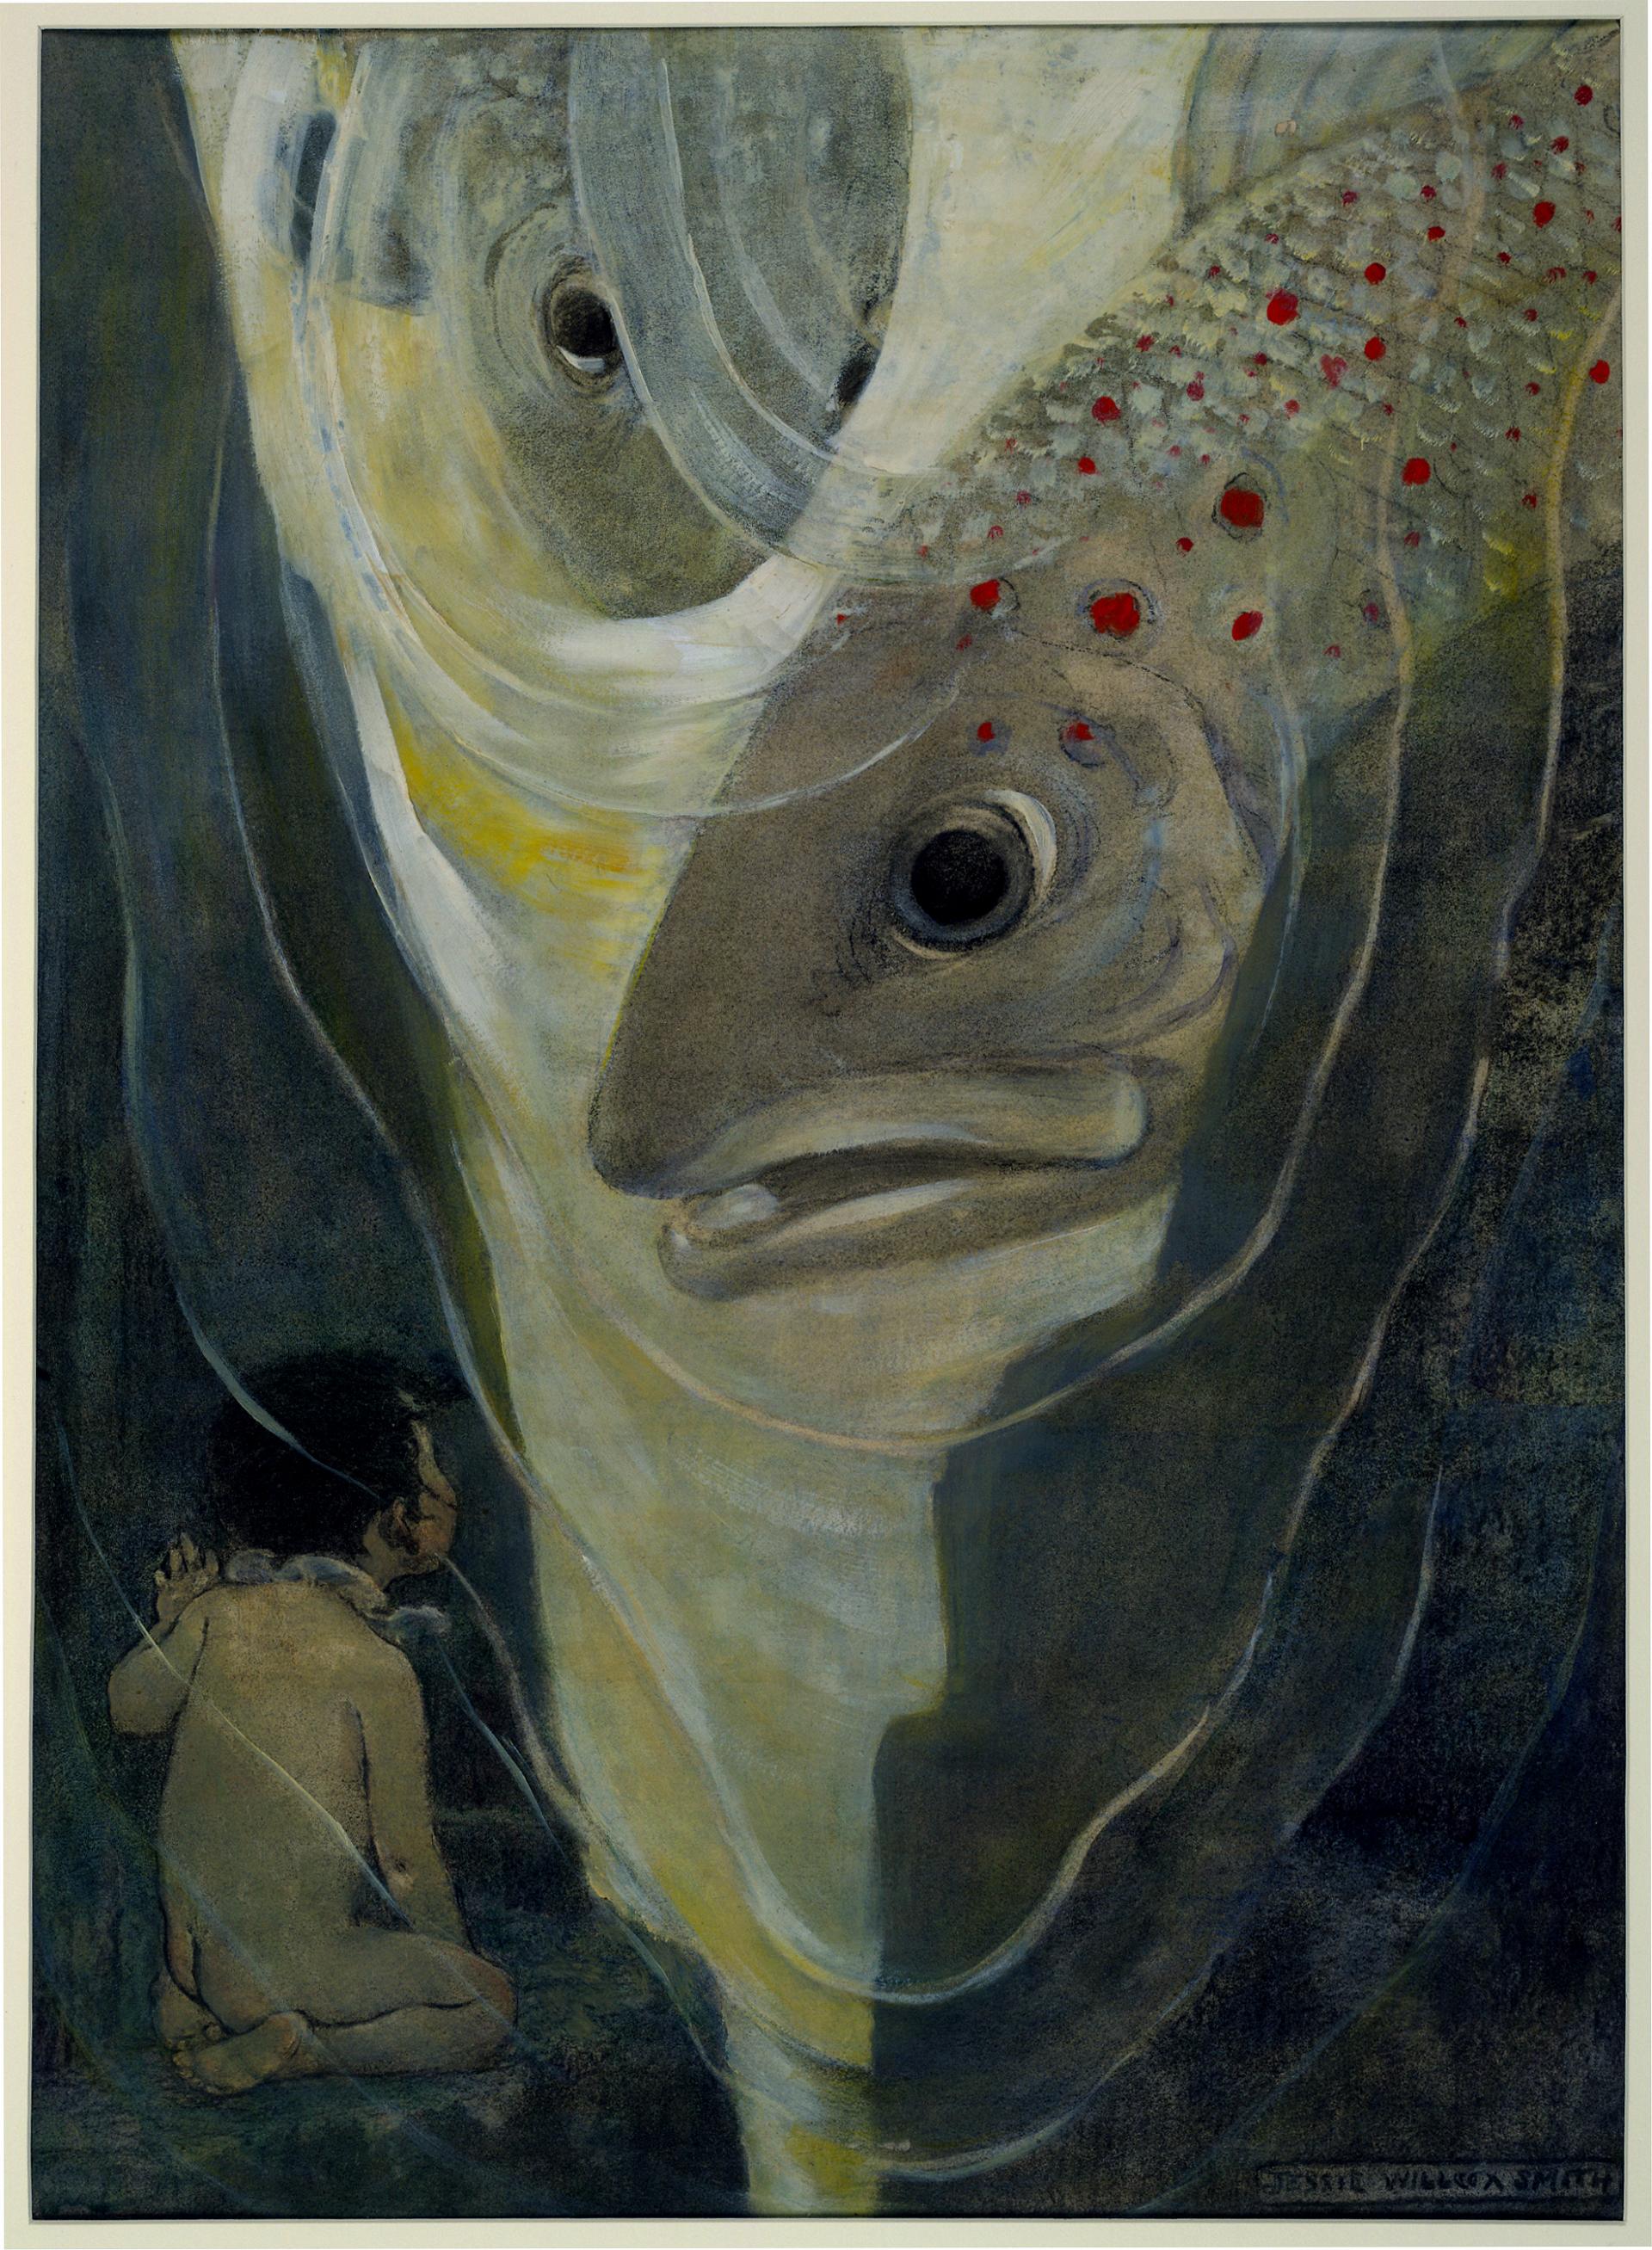 illustration from The Water-Babies